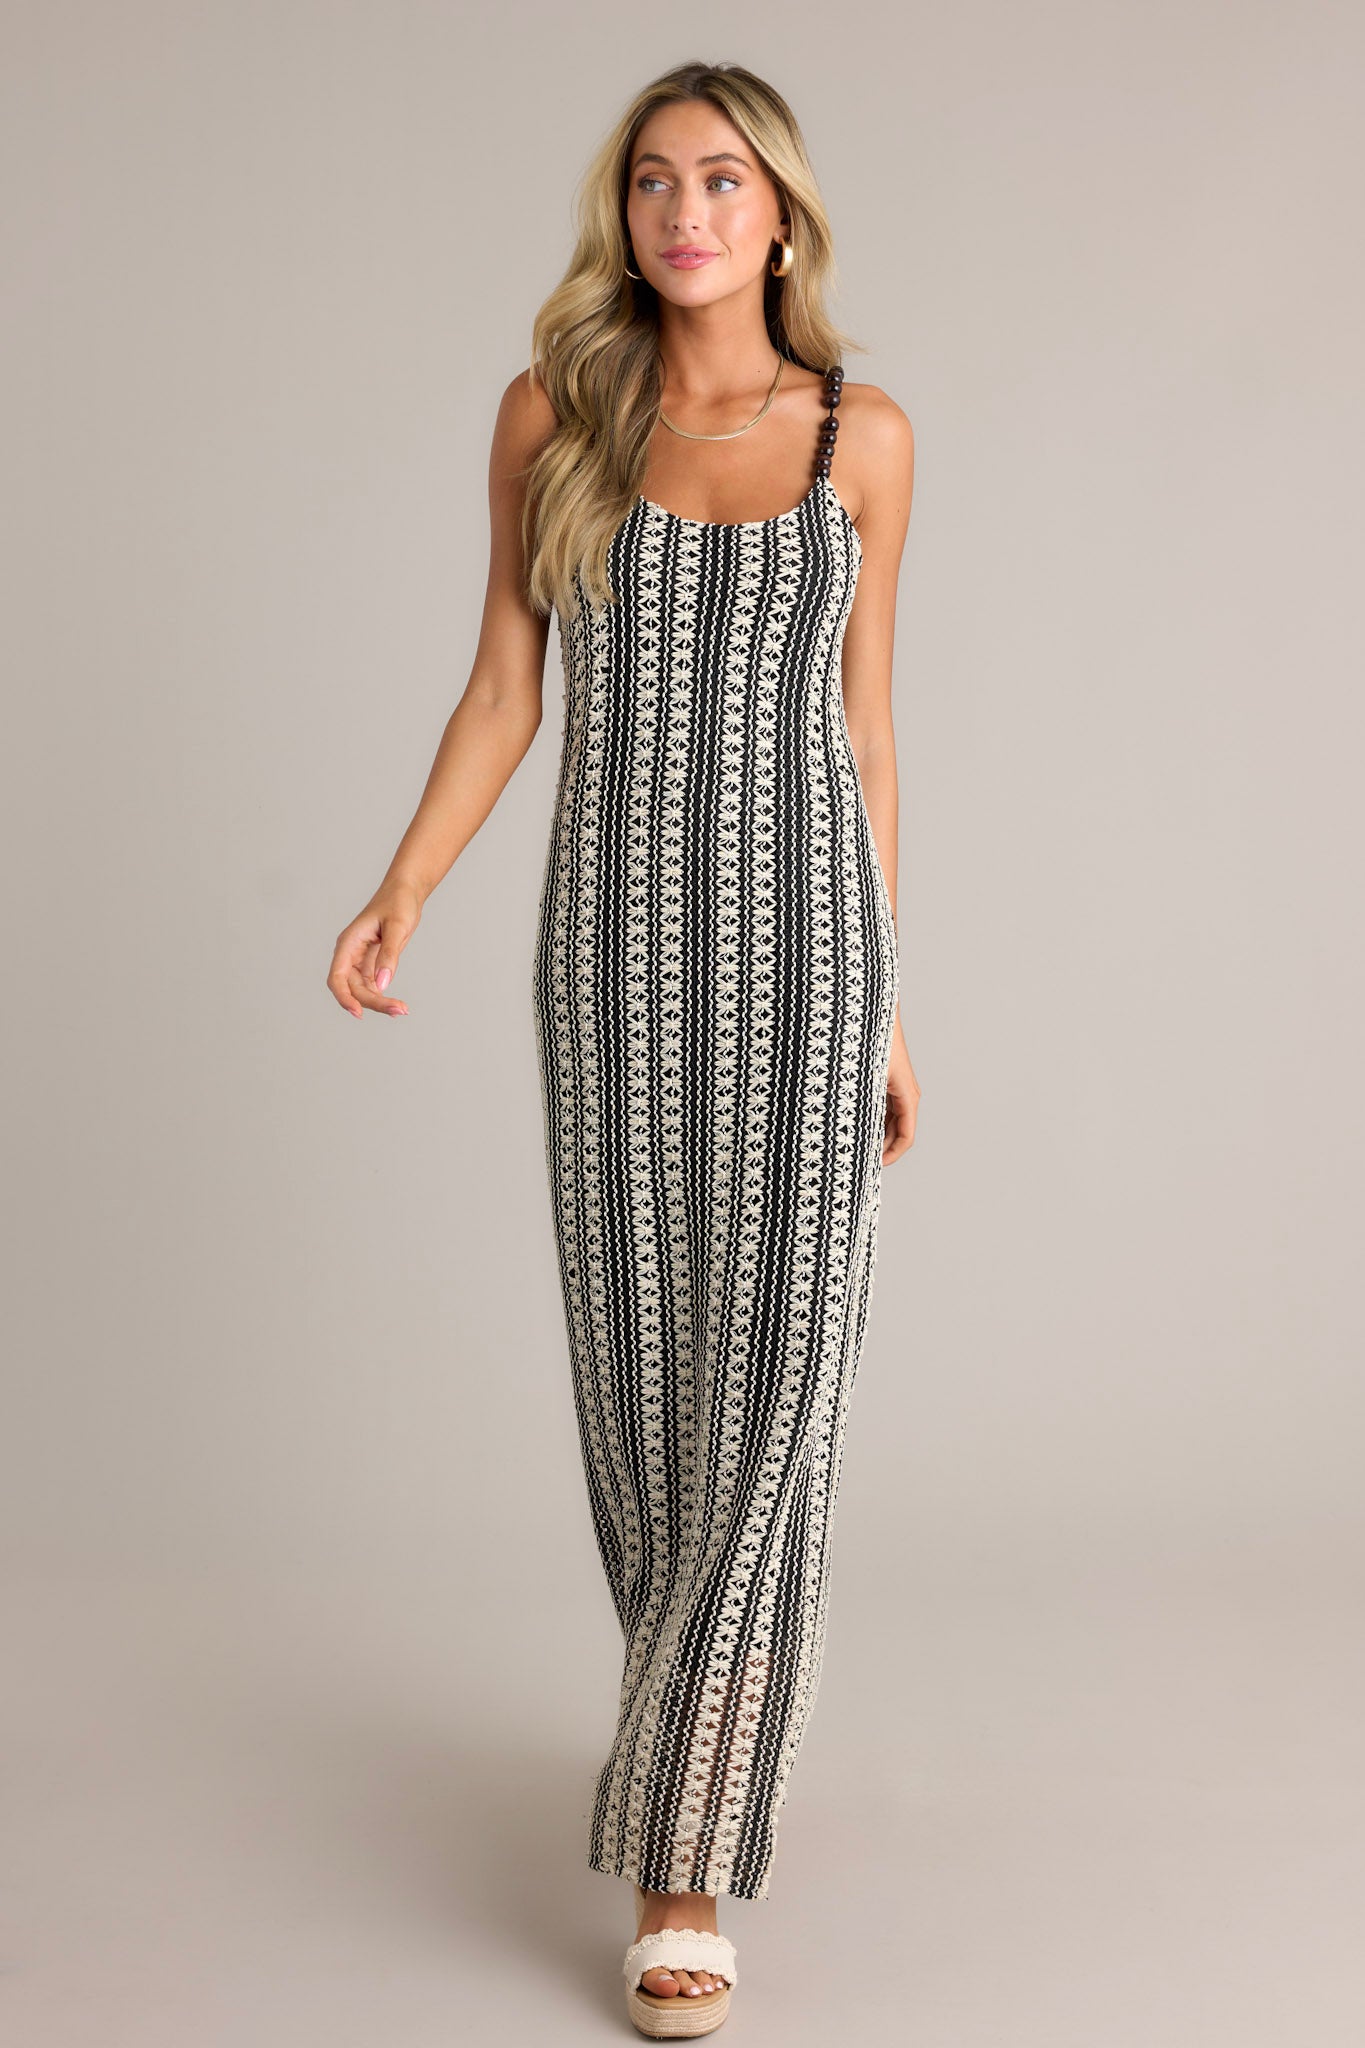 This black stripe maxi dress features a scoop neckline, fully beaded straps, a knitted design, and a vertical stripe pattern.